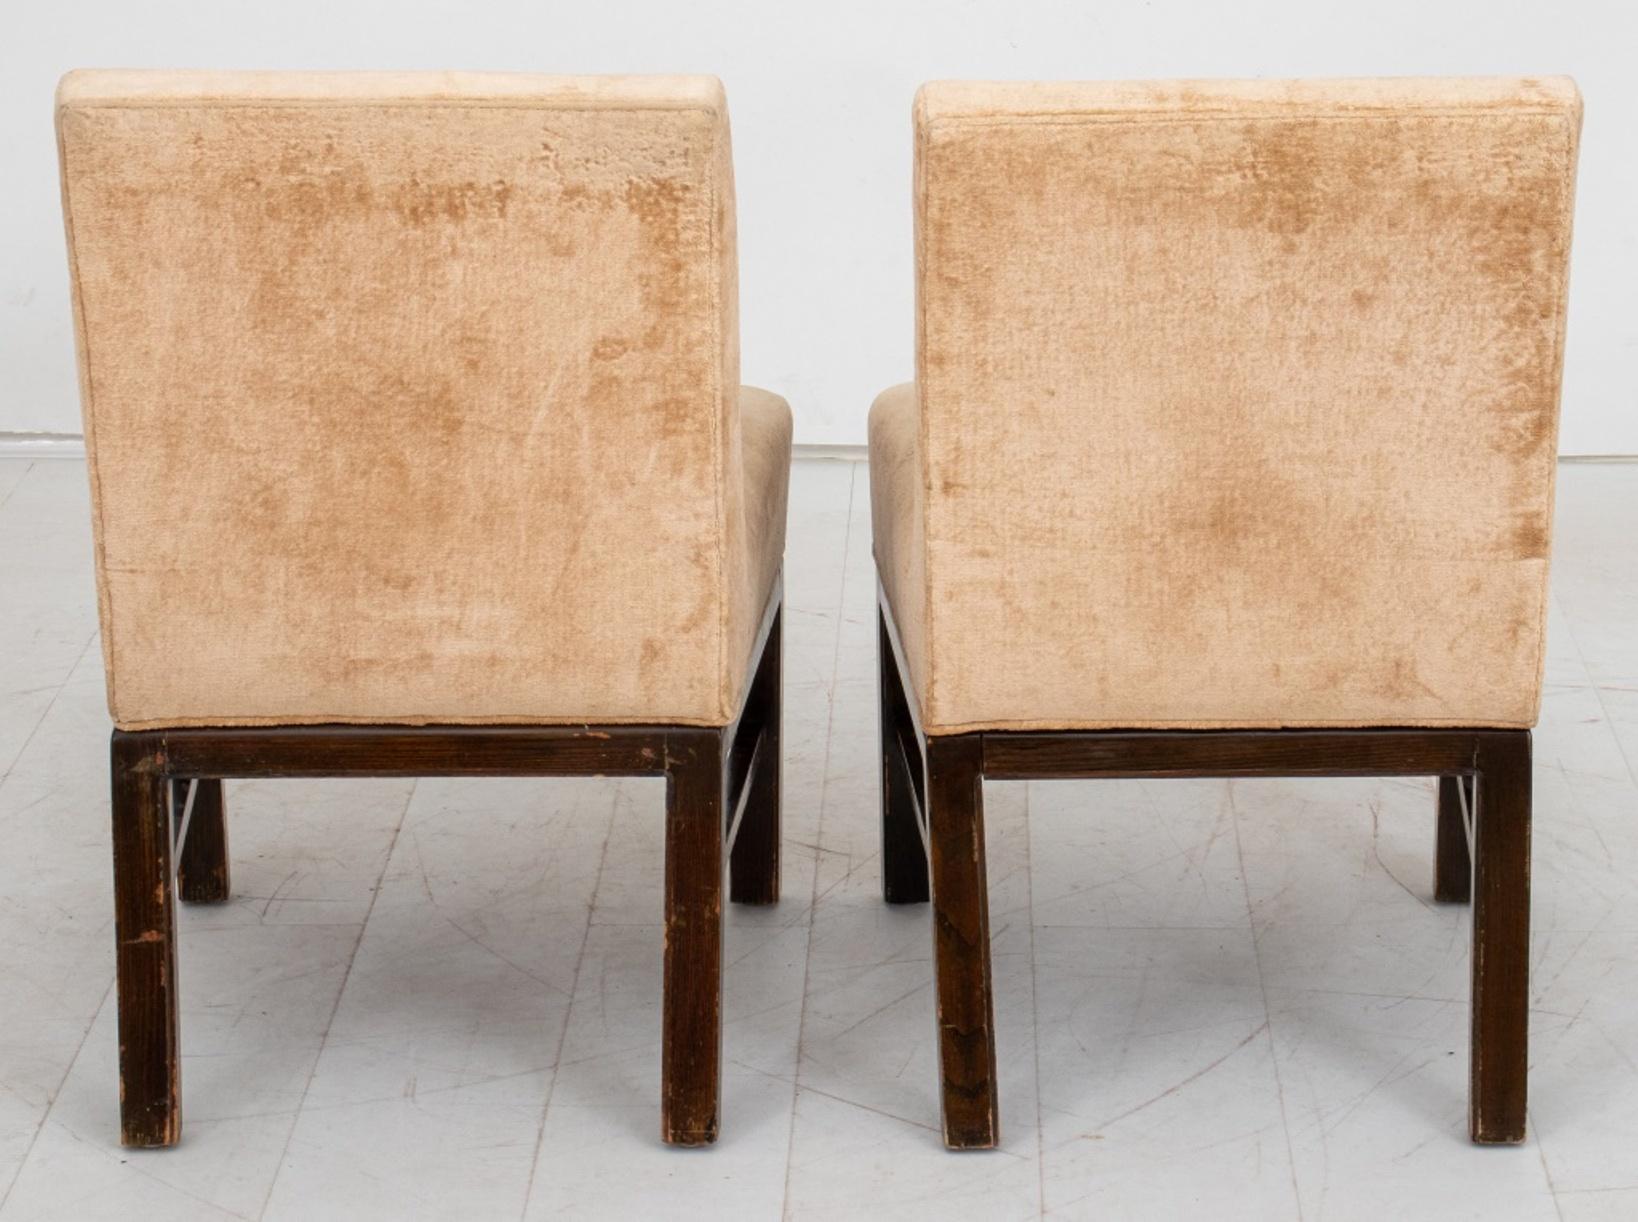 Contemporary Upholstered Slipper Chairs, Pair For Sale